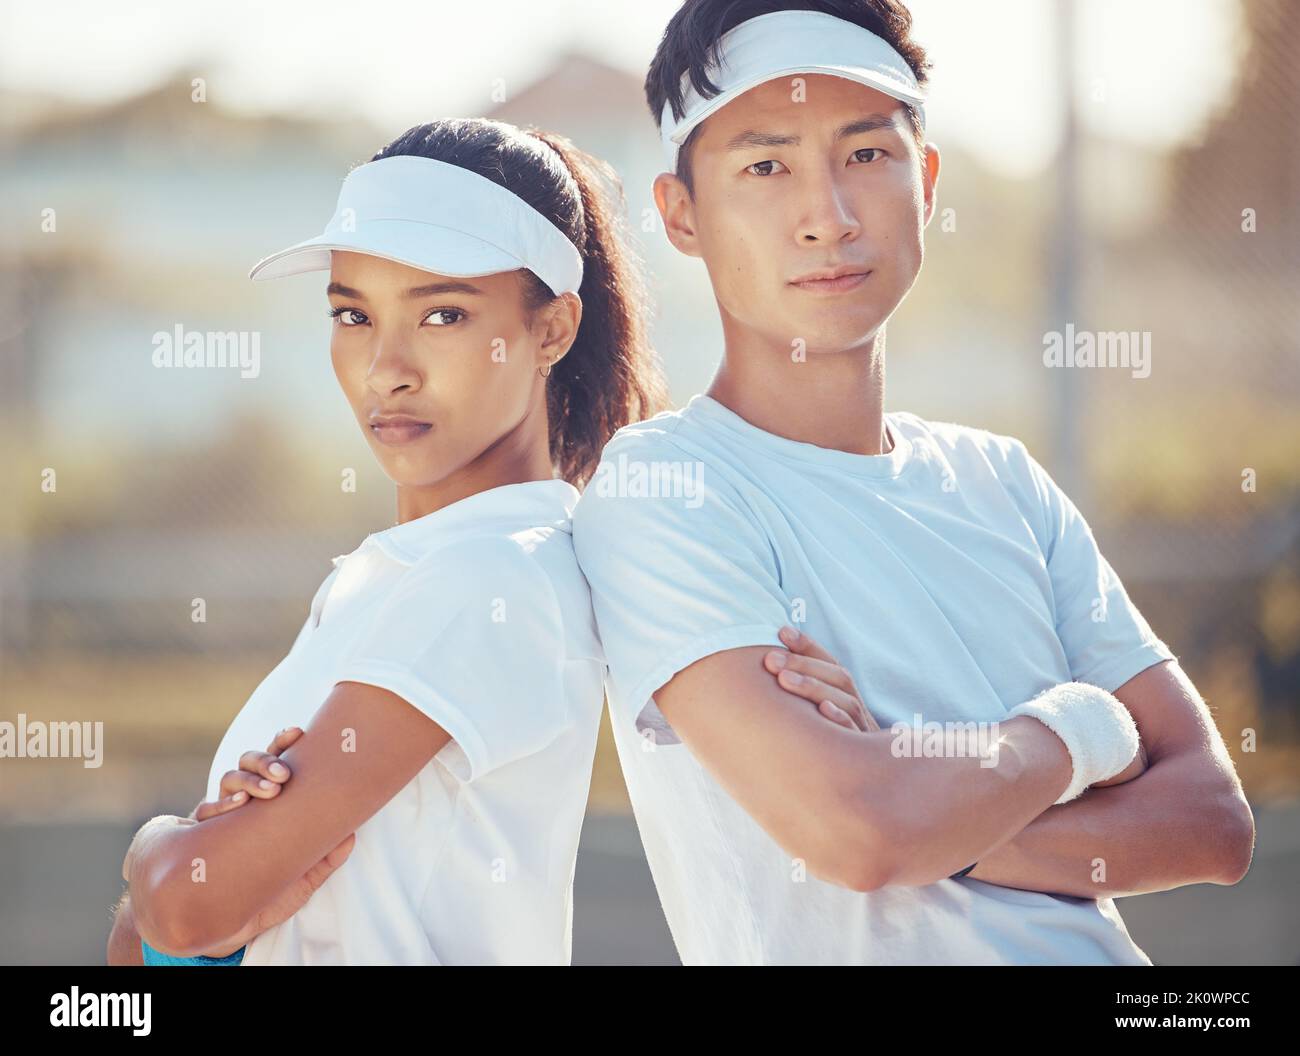 Tennis team, competitive sport and serious man and woman ready for a game or match on an outdoor court. Fitness with players standing together for Stock Photo